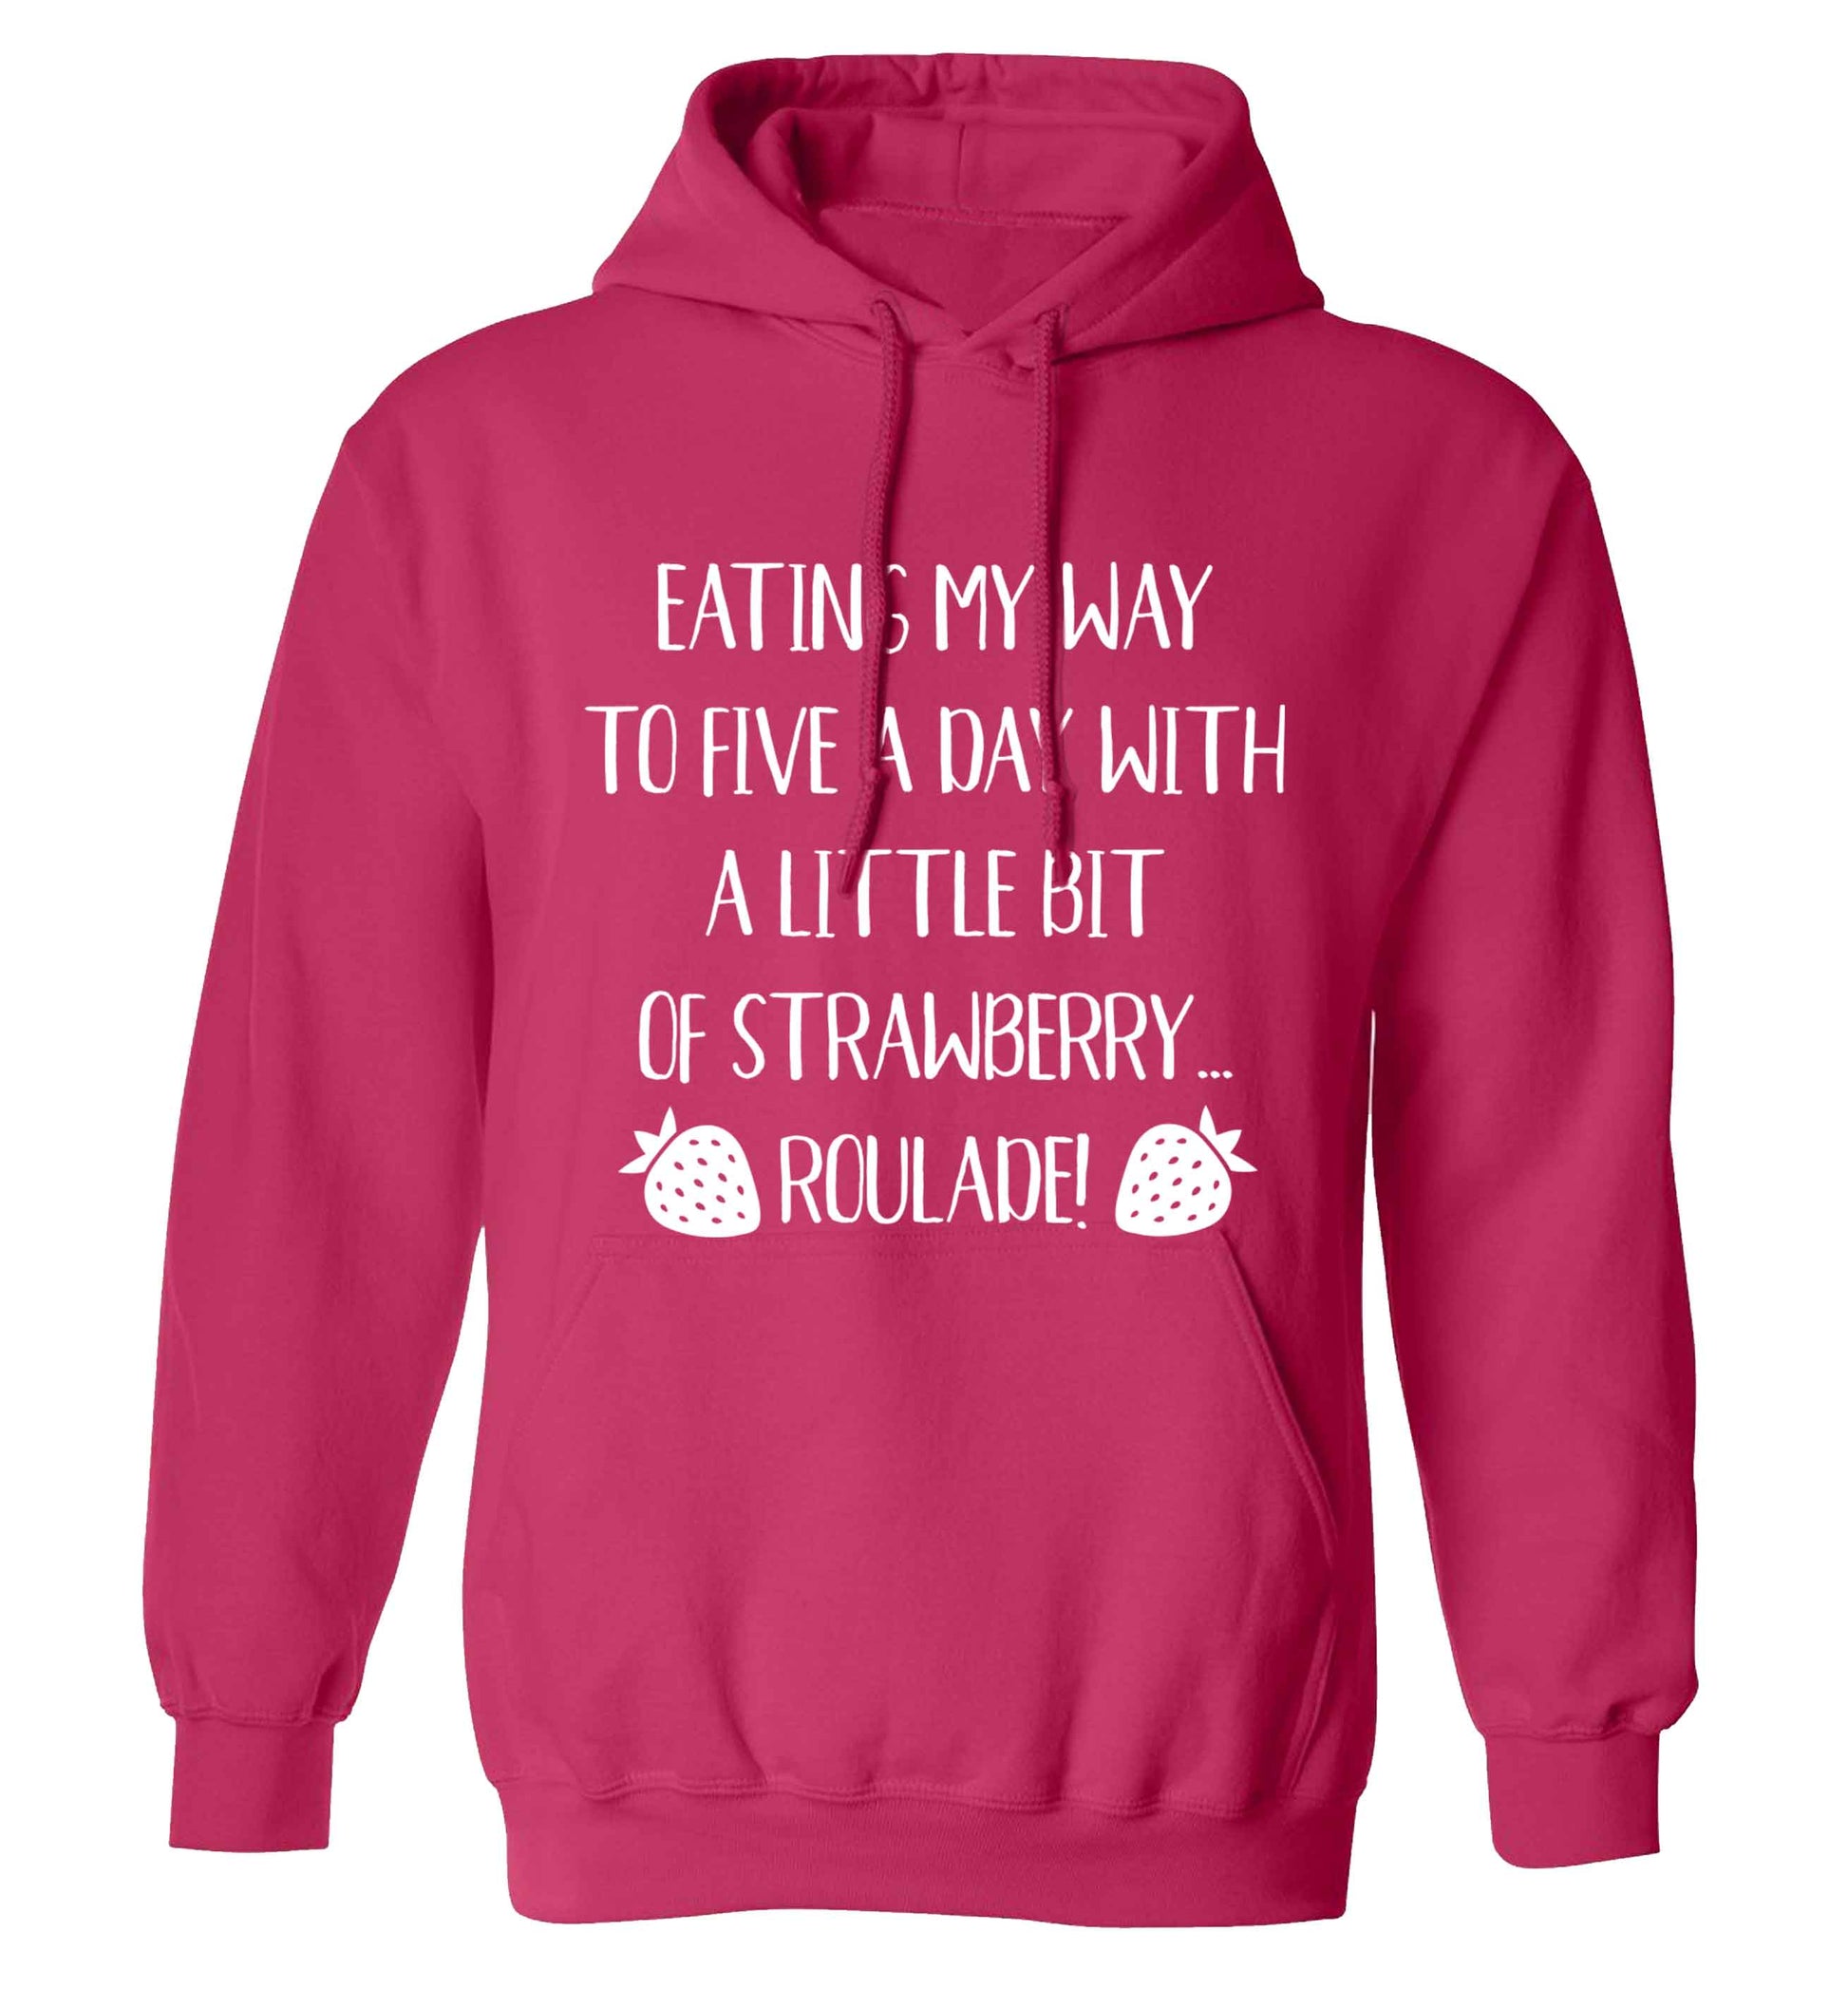 Eating my way to five a day with a little bit of strawberry roulade adults unisex pink hoodie 2XL